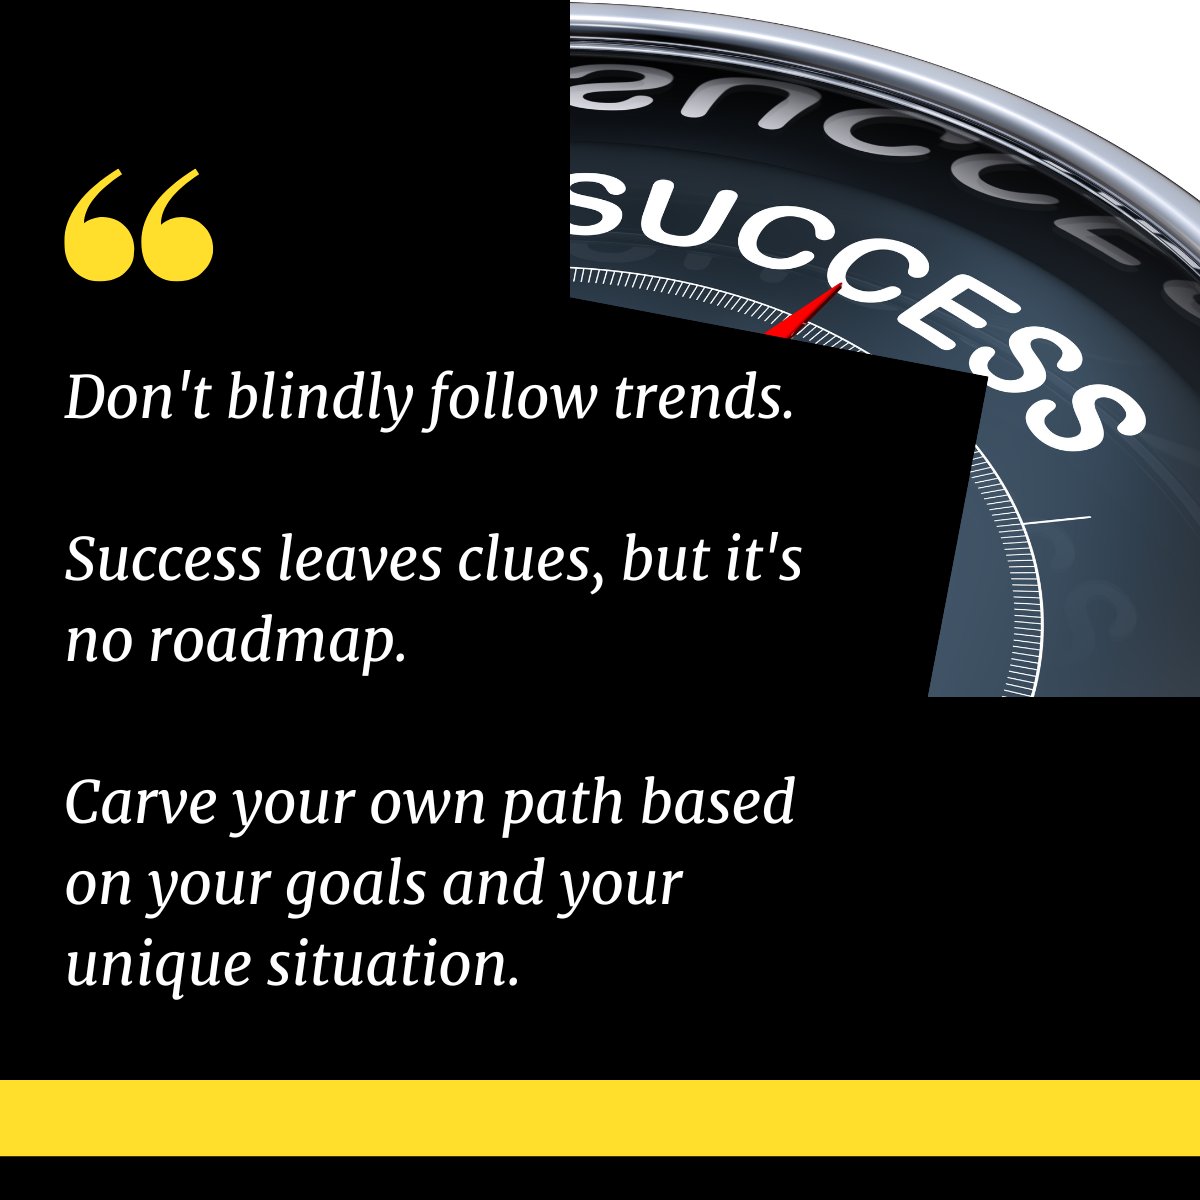 Don't blindly follow trends. Success leaves clues, but it's no roadmap. Carve your own path based on your goals and your unique situation. #mindset